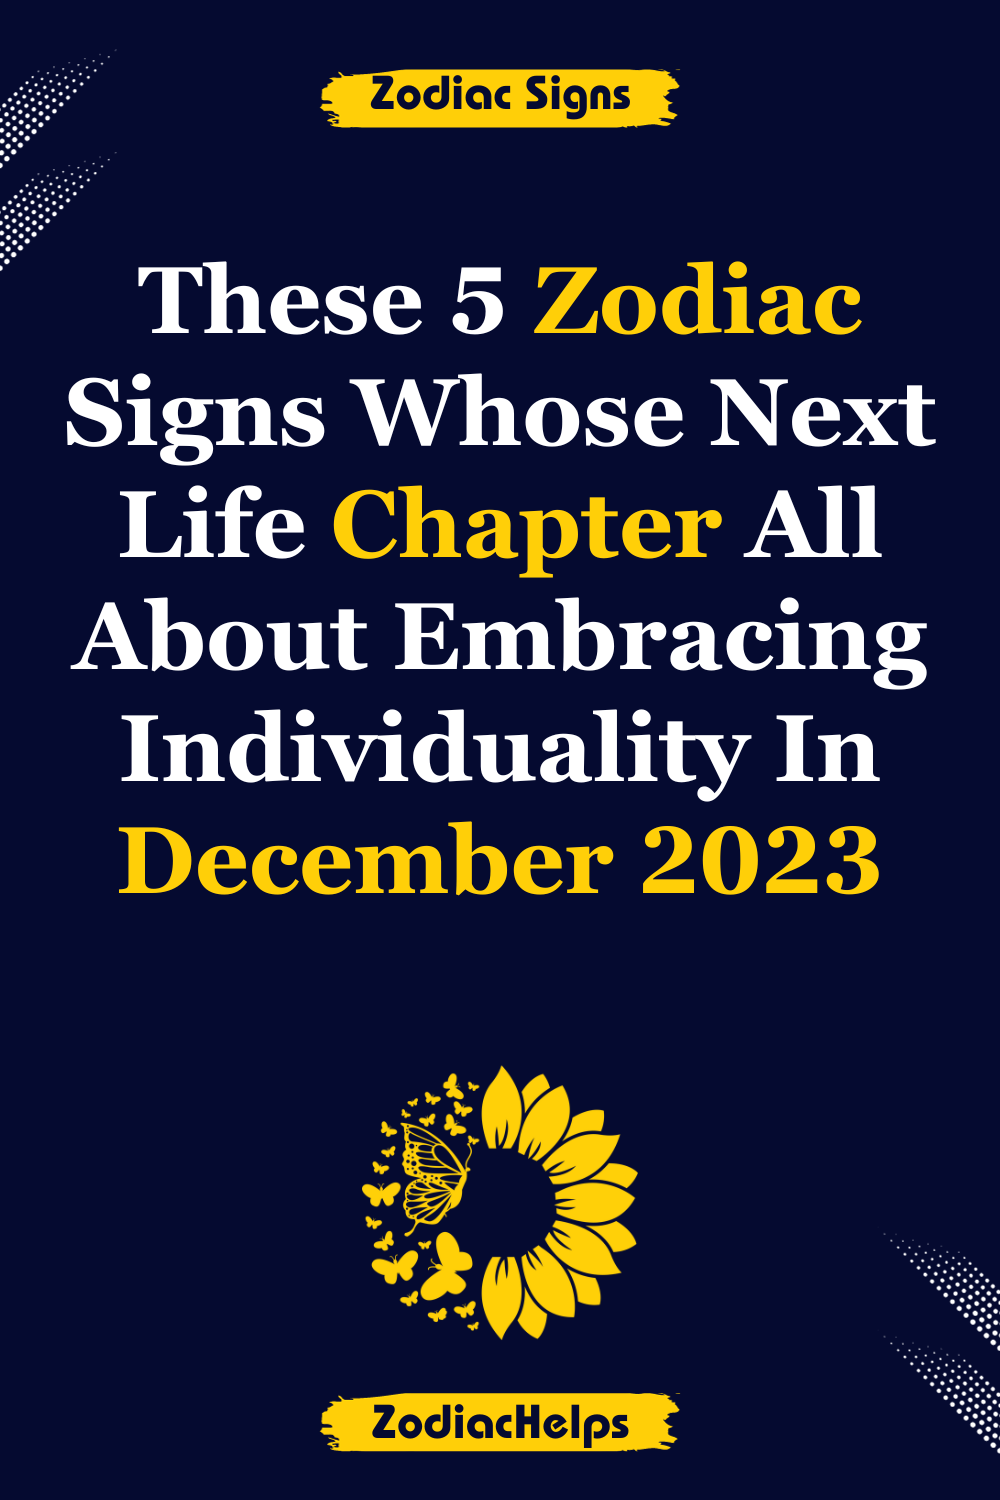 These 5 Zodiac Signs Whose Next Life Chapter Individuality In December 2023